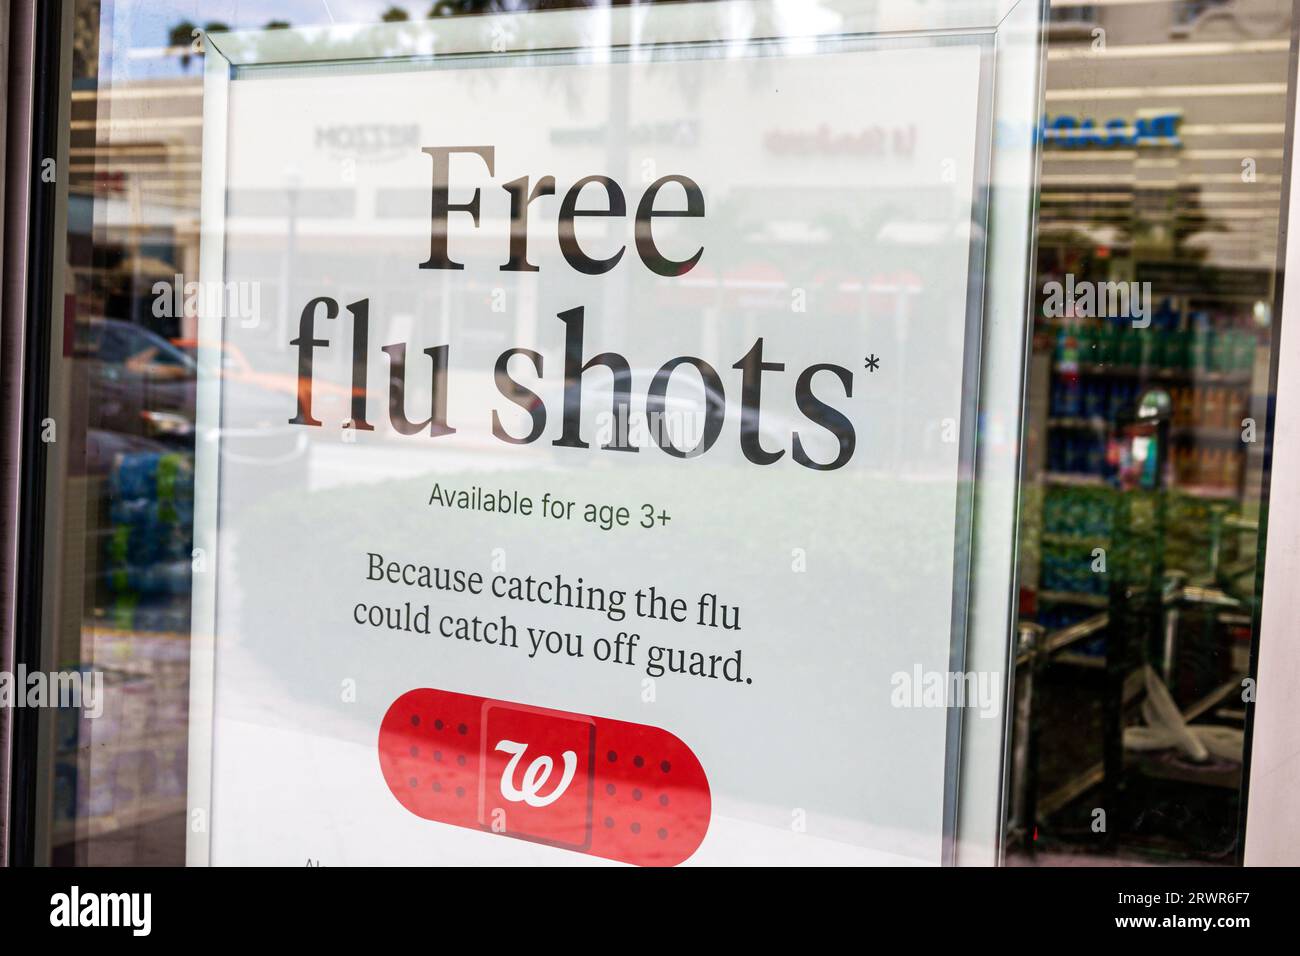 Miami Beach Florida,Walgreens Pharmacy drugstore,inside interior indoors,sign notice,free flu shots offered promotion,sign information,promoting promo Stock Photo